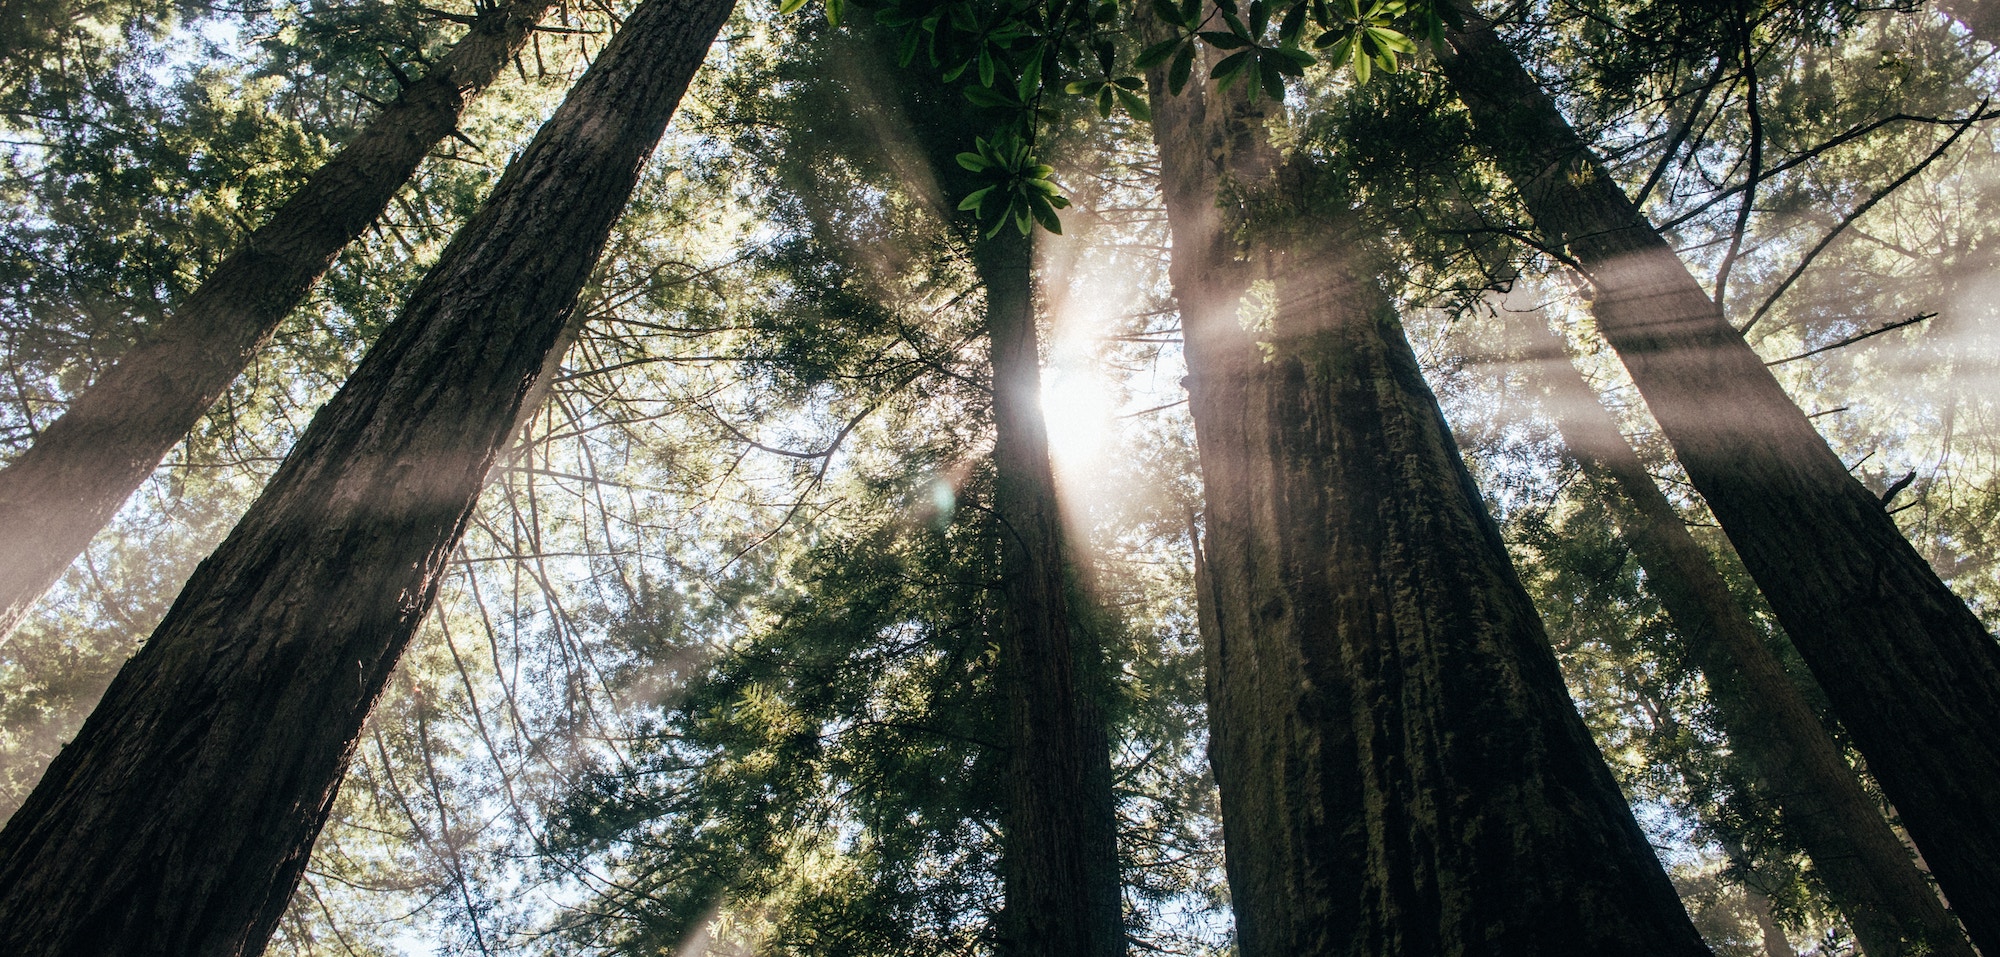 Trees by Spencer Backman on Unsplash